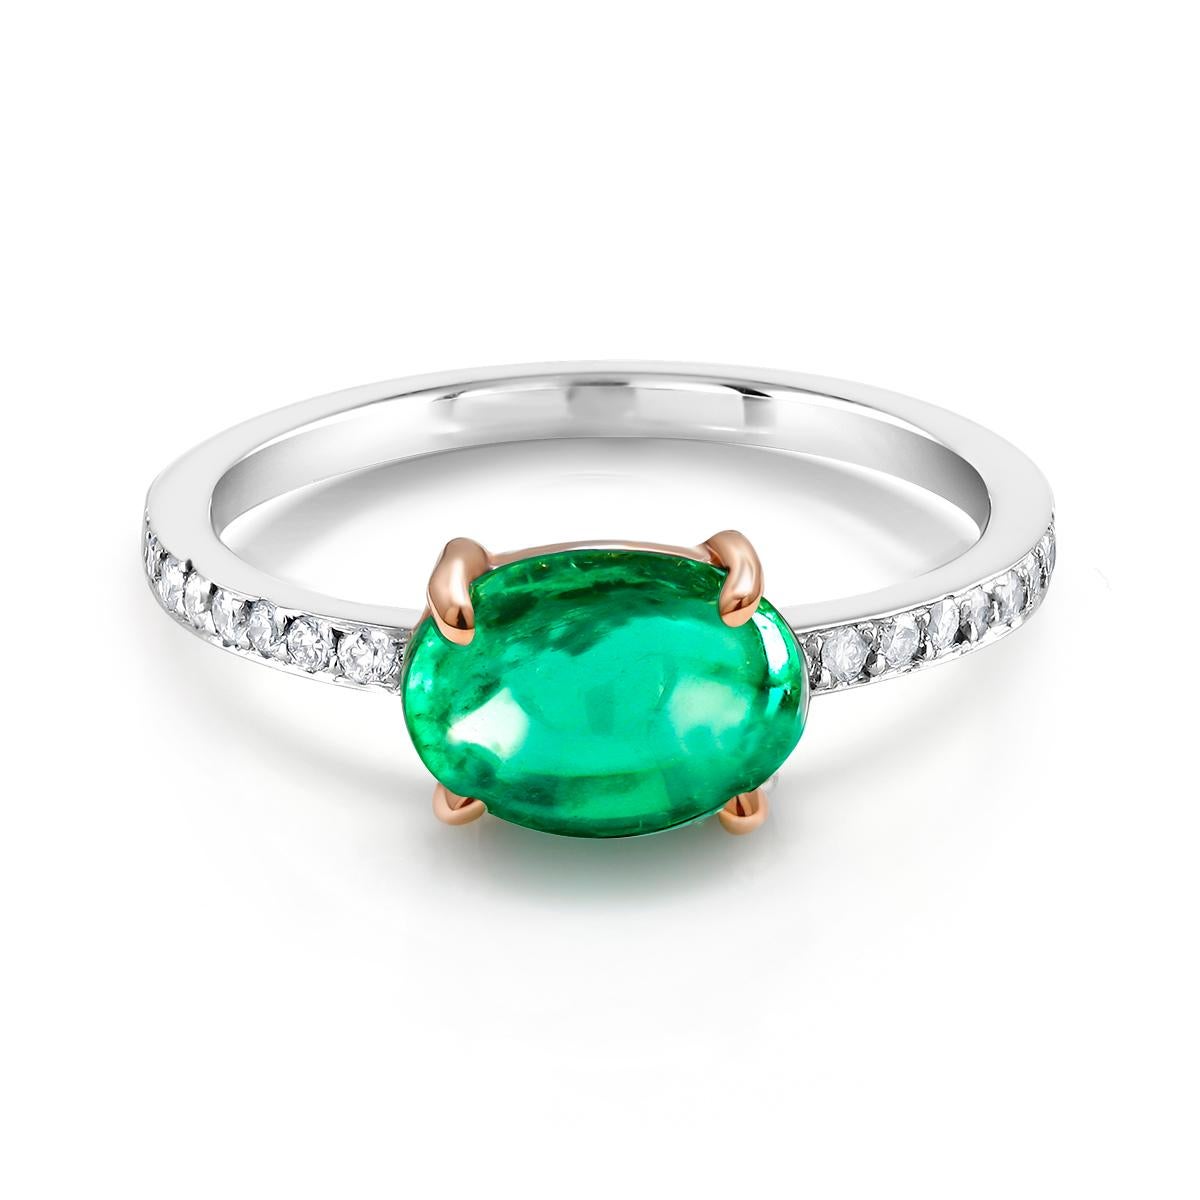 14 karat white gold cabochon emerald and diamond ring
Cabochon emerald weighing 1.90 carat 
Diamond weighing 0.20      
Emerald measuring 9x7 millimeter
One of a kind ring                                                                
Ring size 6